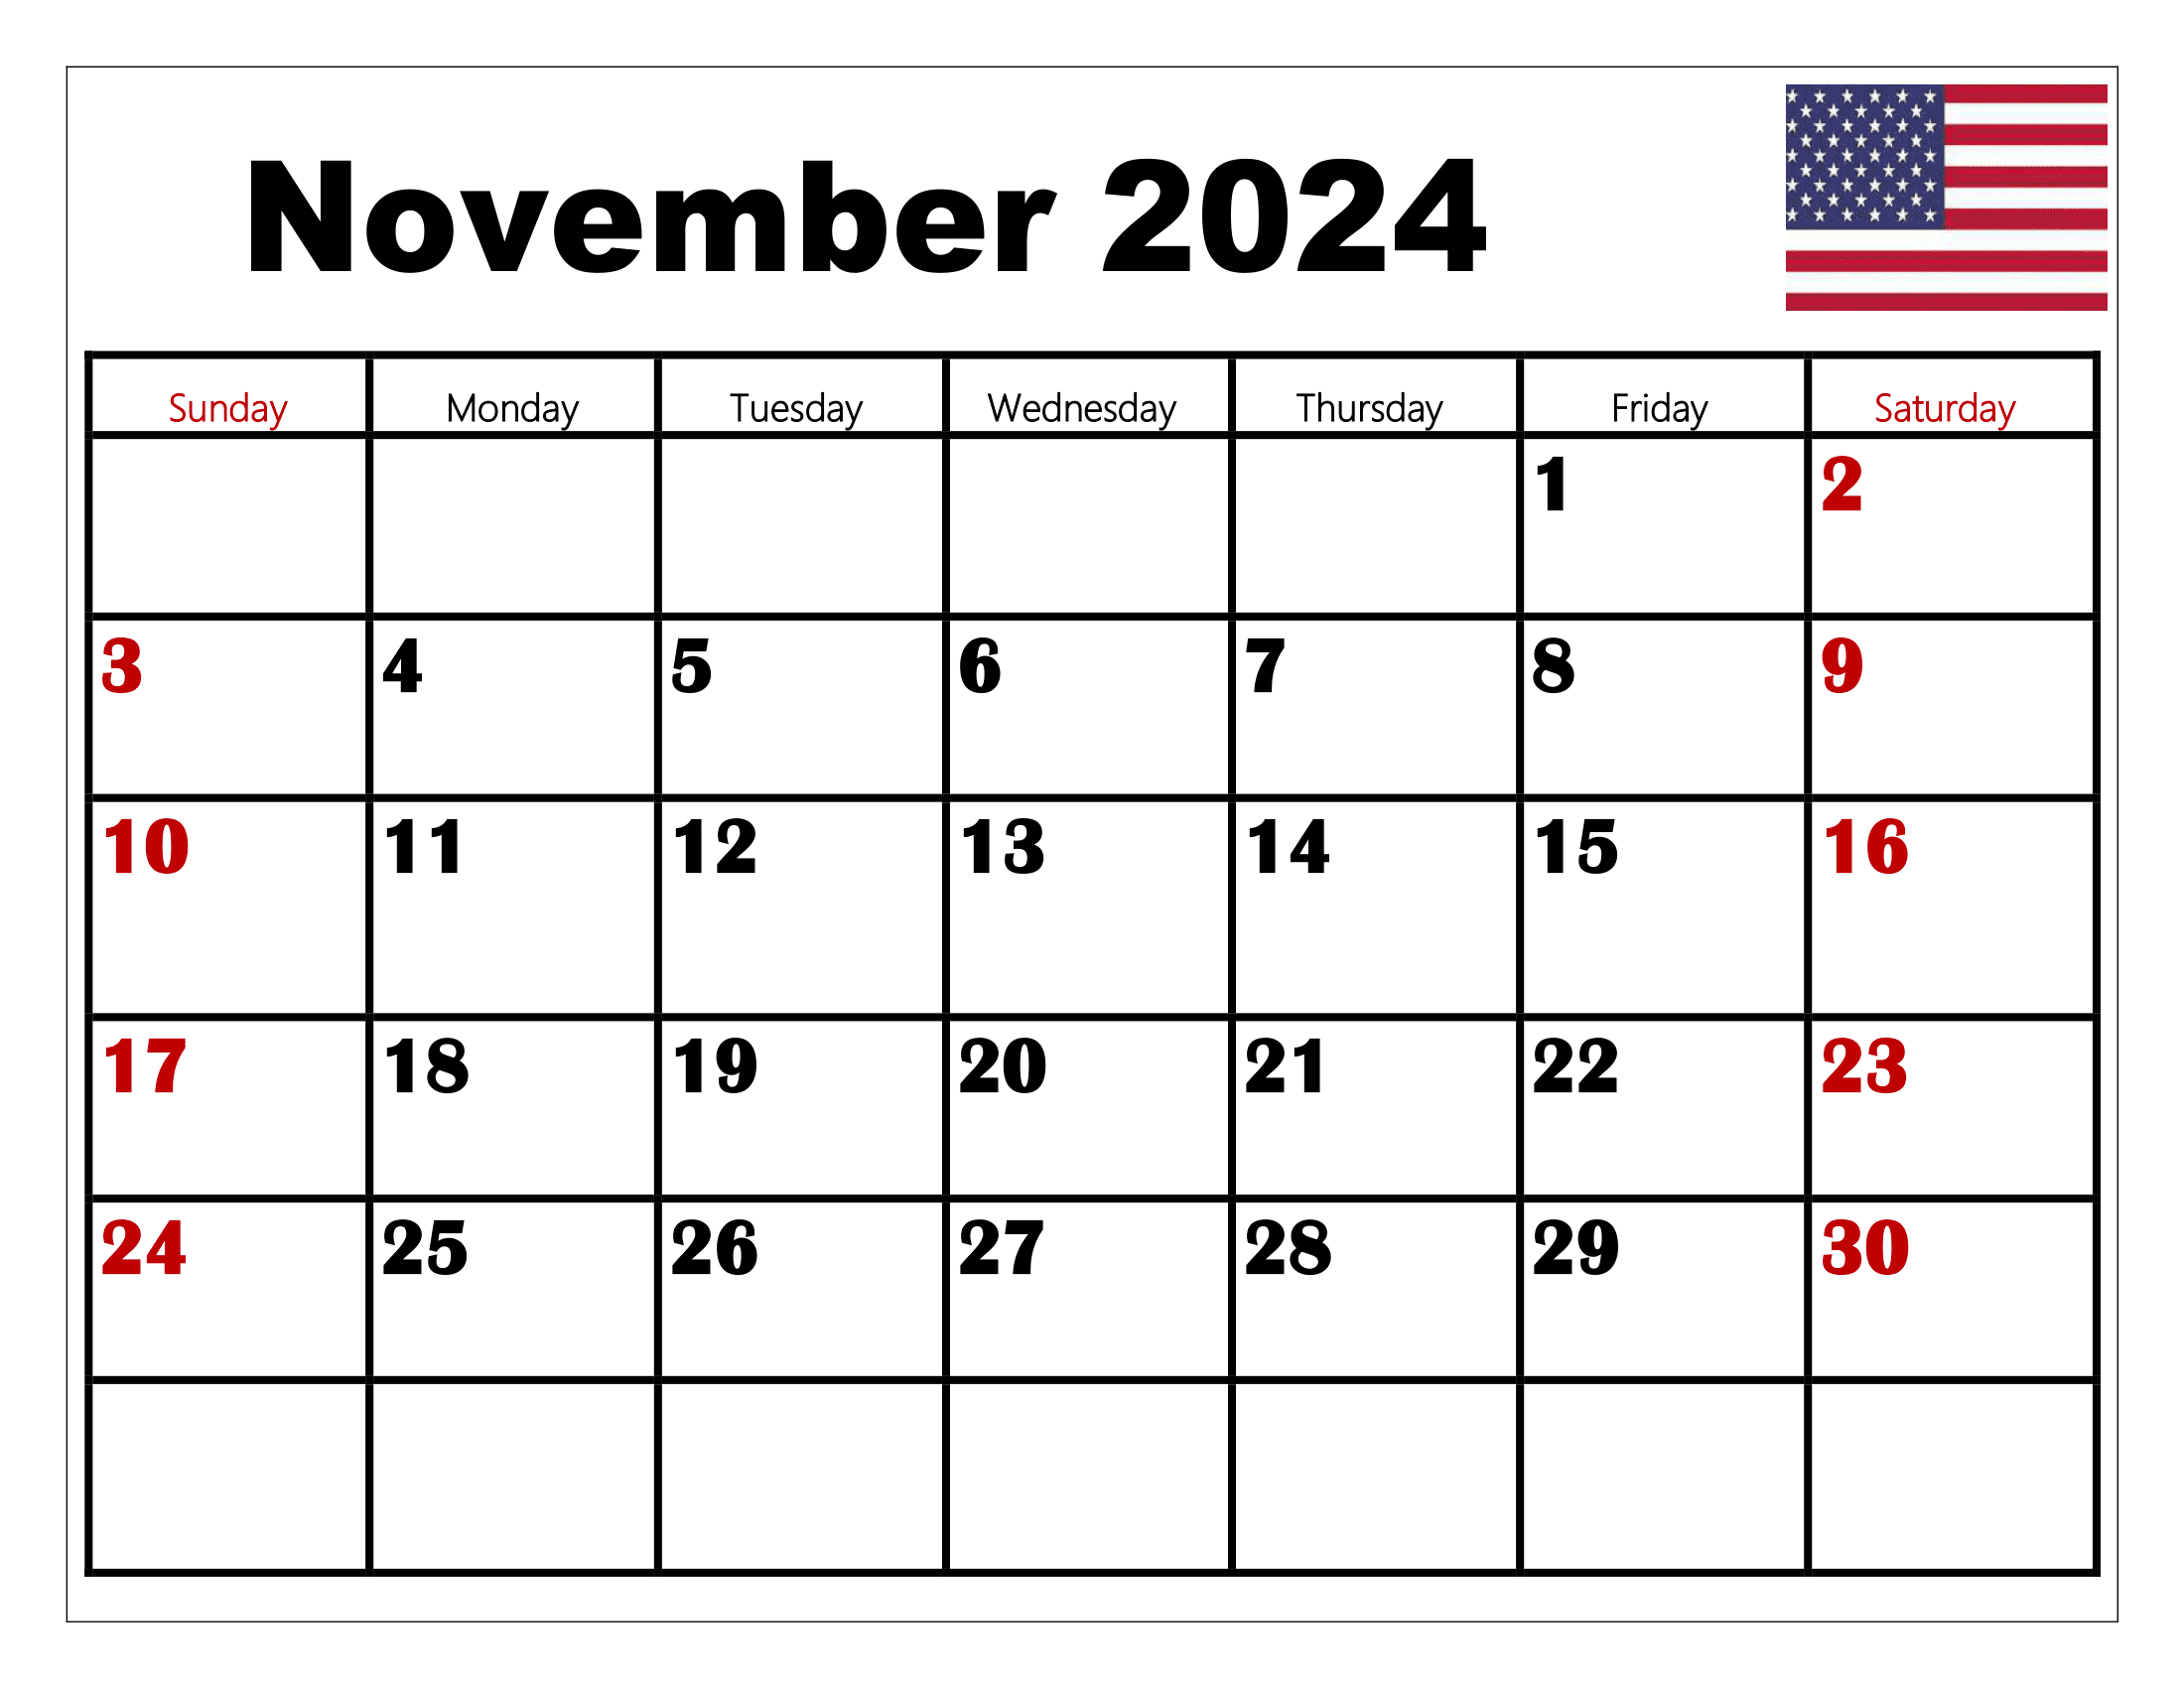 November 2024 Calendar Printable Pdf Template With Holidays inside Free Printable Appointment Calendar November 2024 Calendar